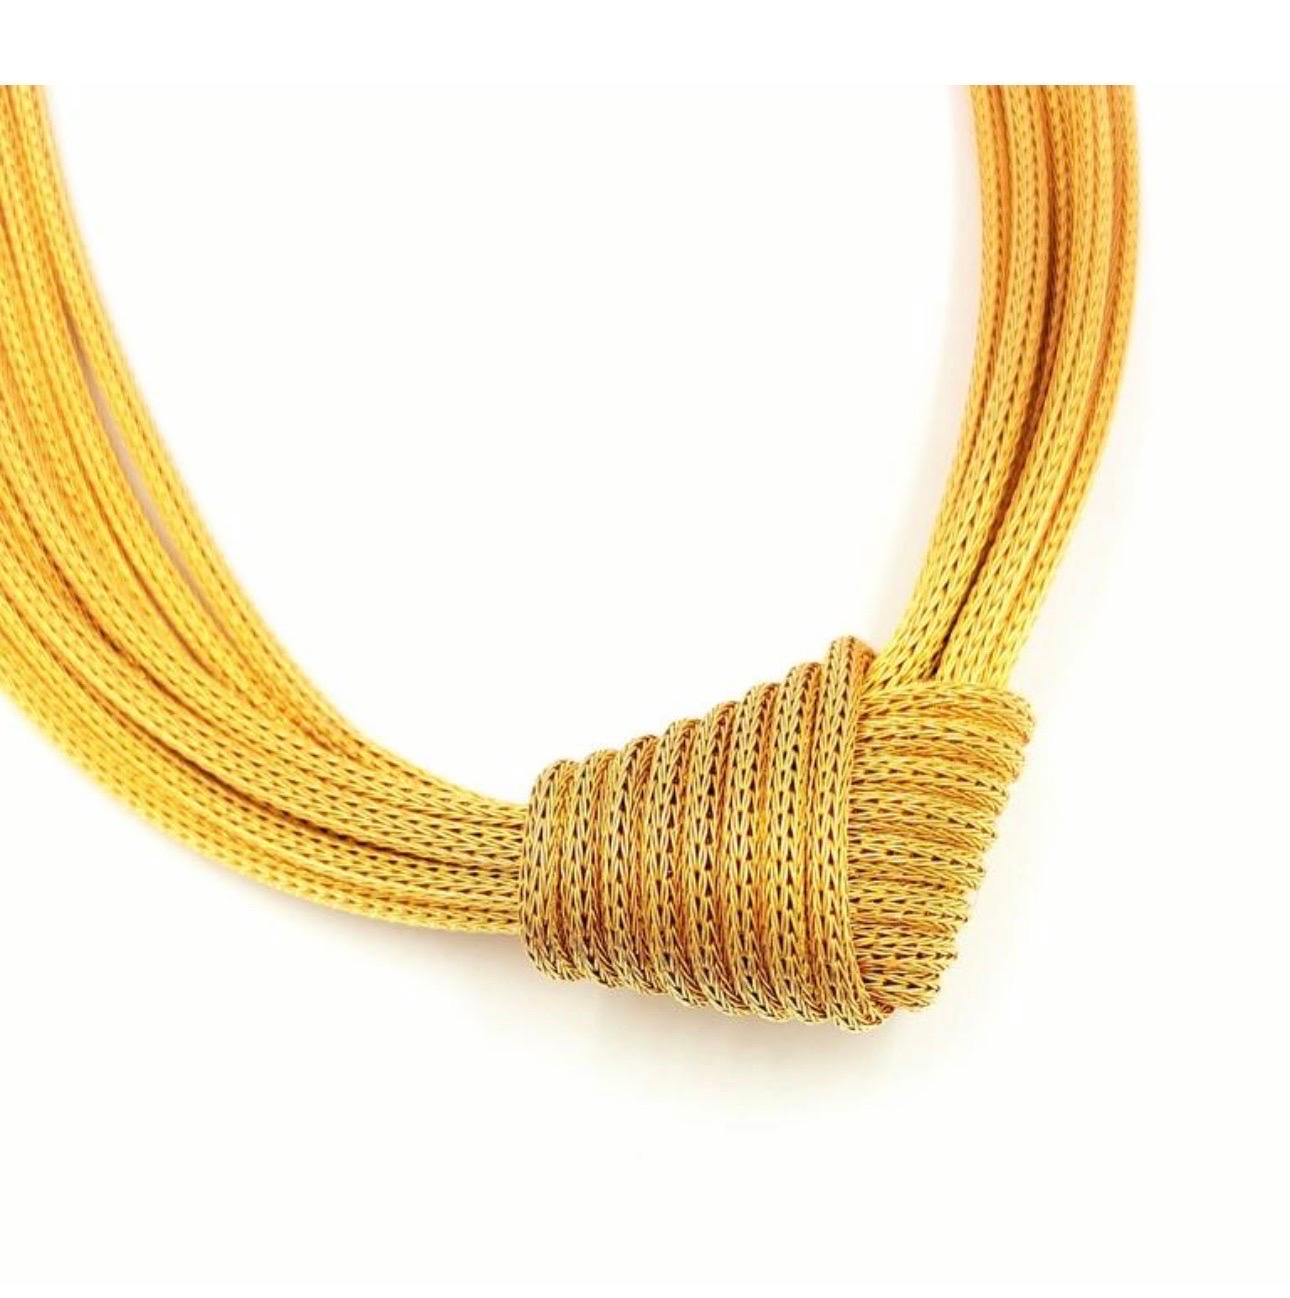 Vintage 14K Solid Yellow Gold Necklace Love Knot Choker, Michael Anthony Jewelers Weaved Mesh Gold Knot Necklace, Eight Strand Mesh Choker
Vintage from the 1980s
Materials: Gold
Beautiful 14K gold necklace with eight mesh strands tied in a knot in